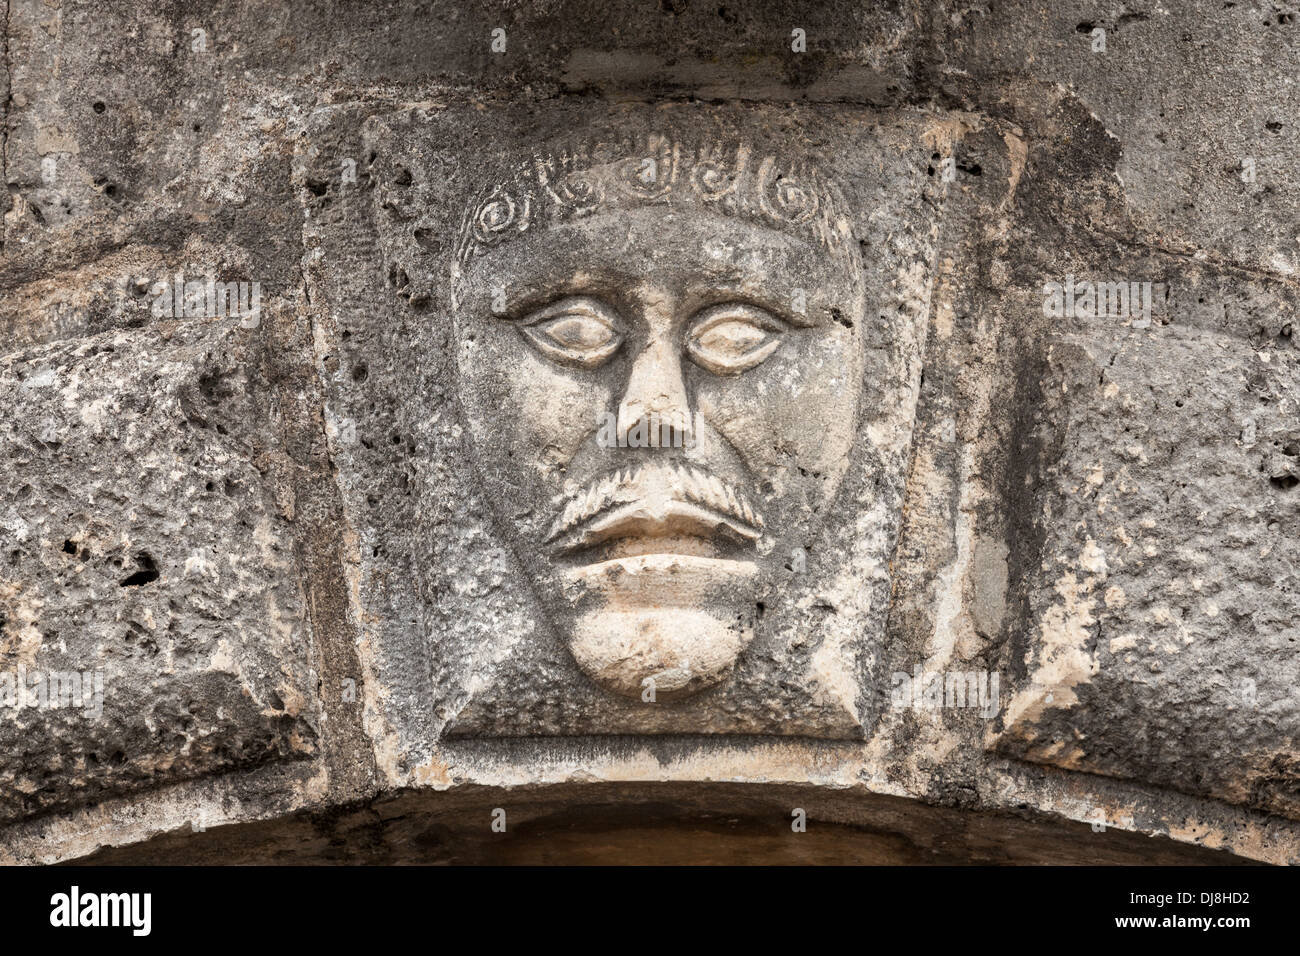 Bas-relief with man's face on ancient house facade in Perast town, Montenegro Stock Photo